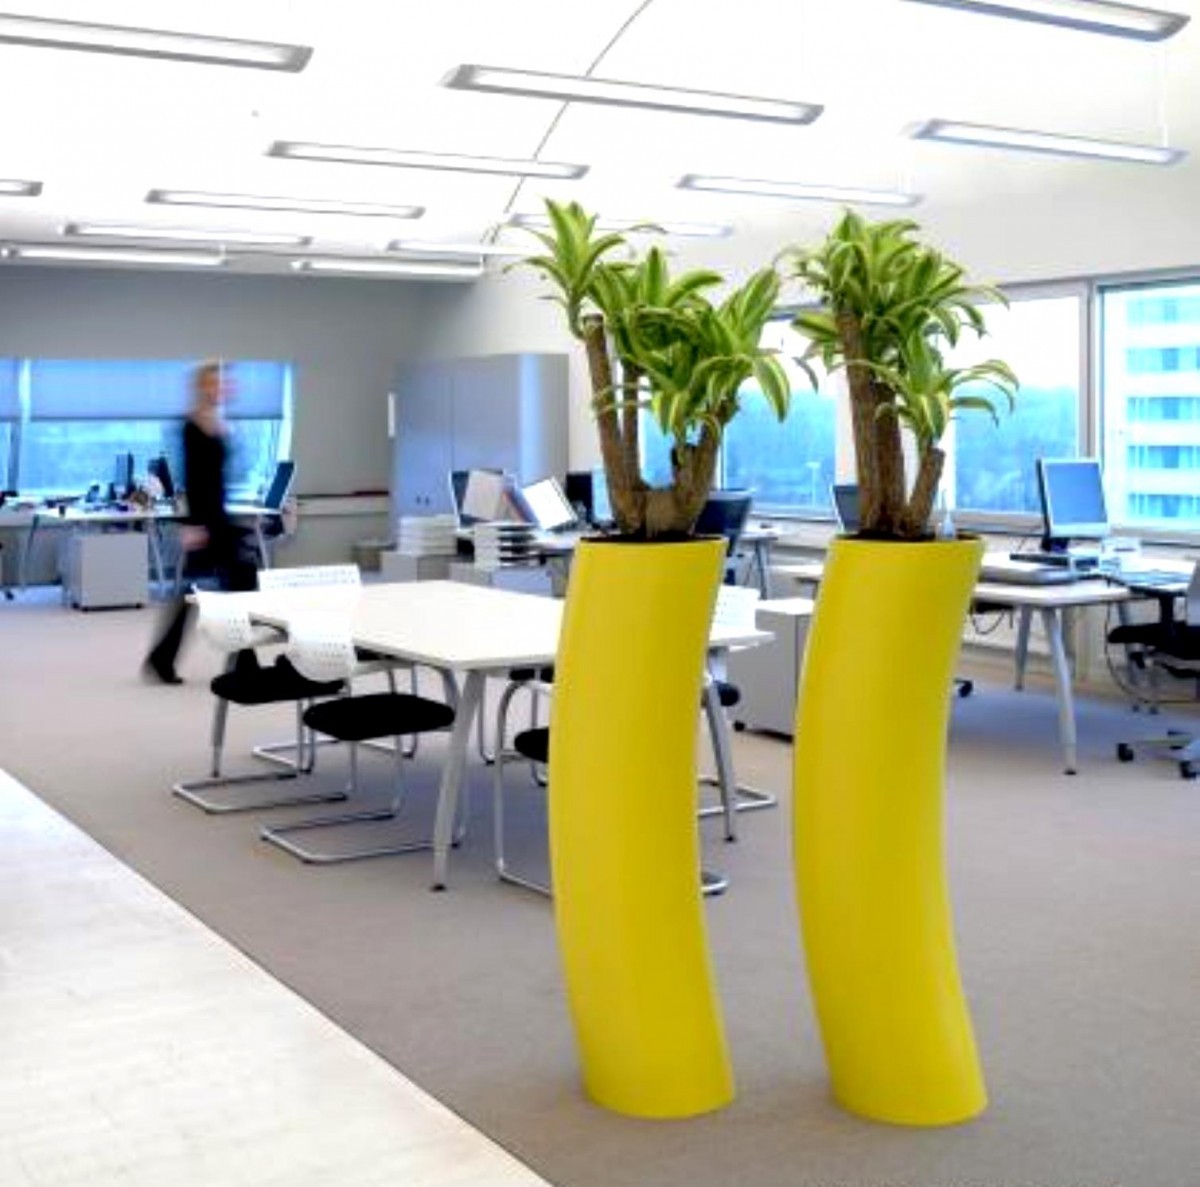 The Power of Plants to Help Boost Office Efficiency